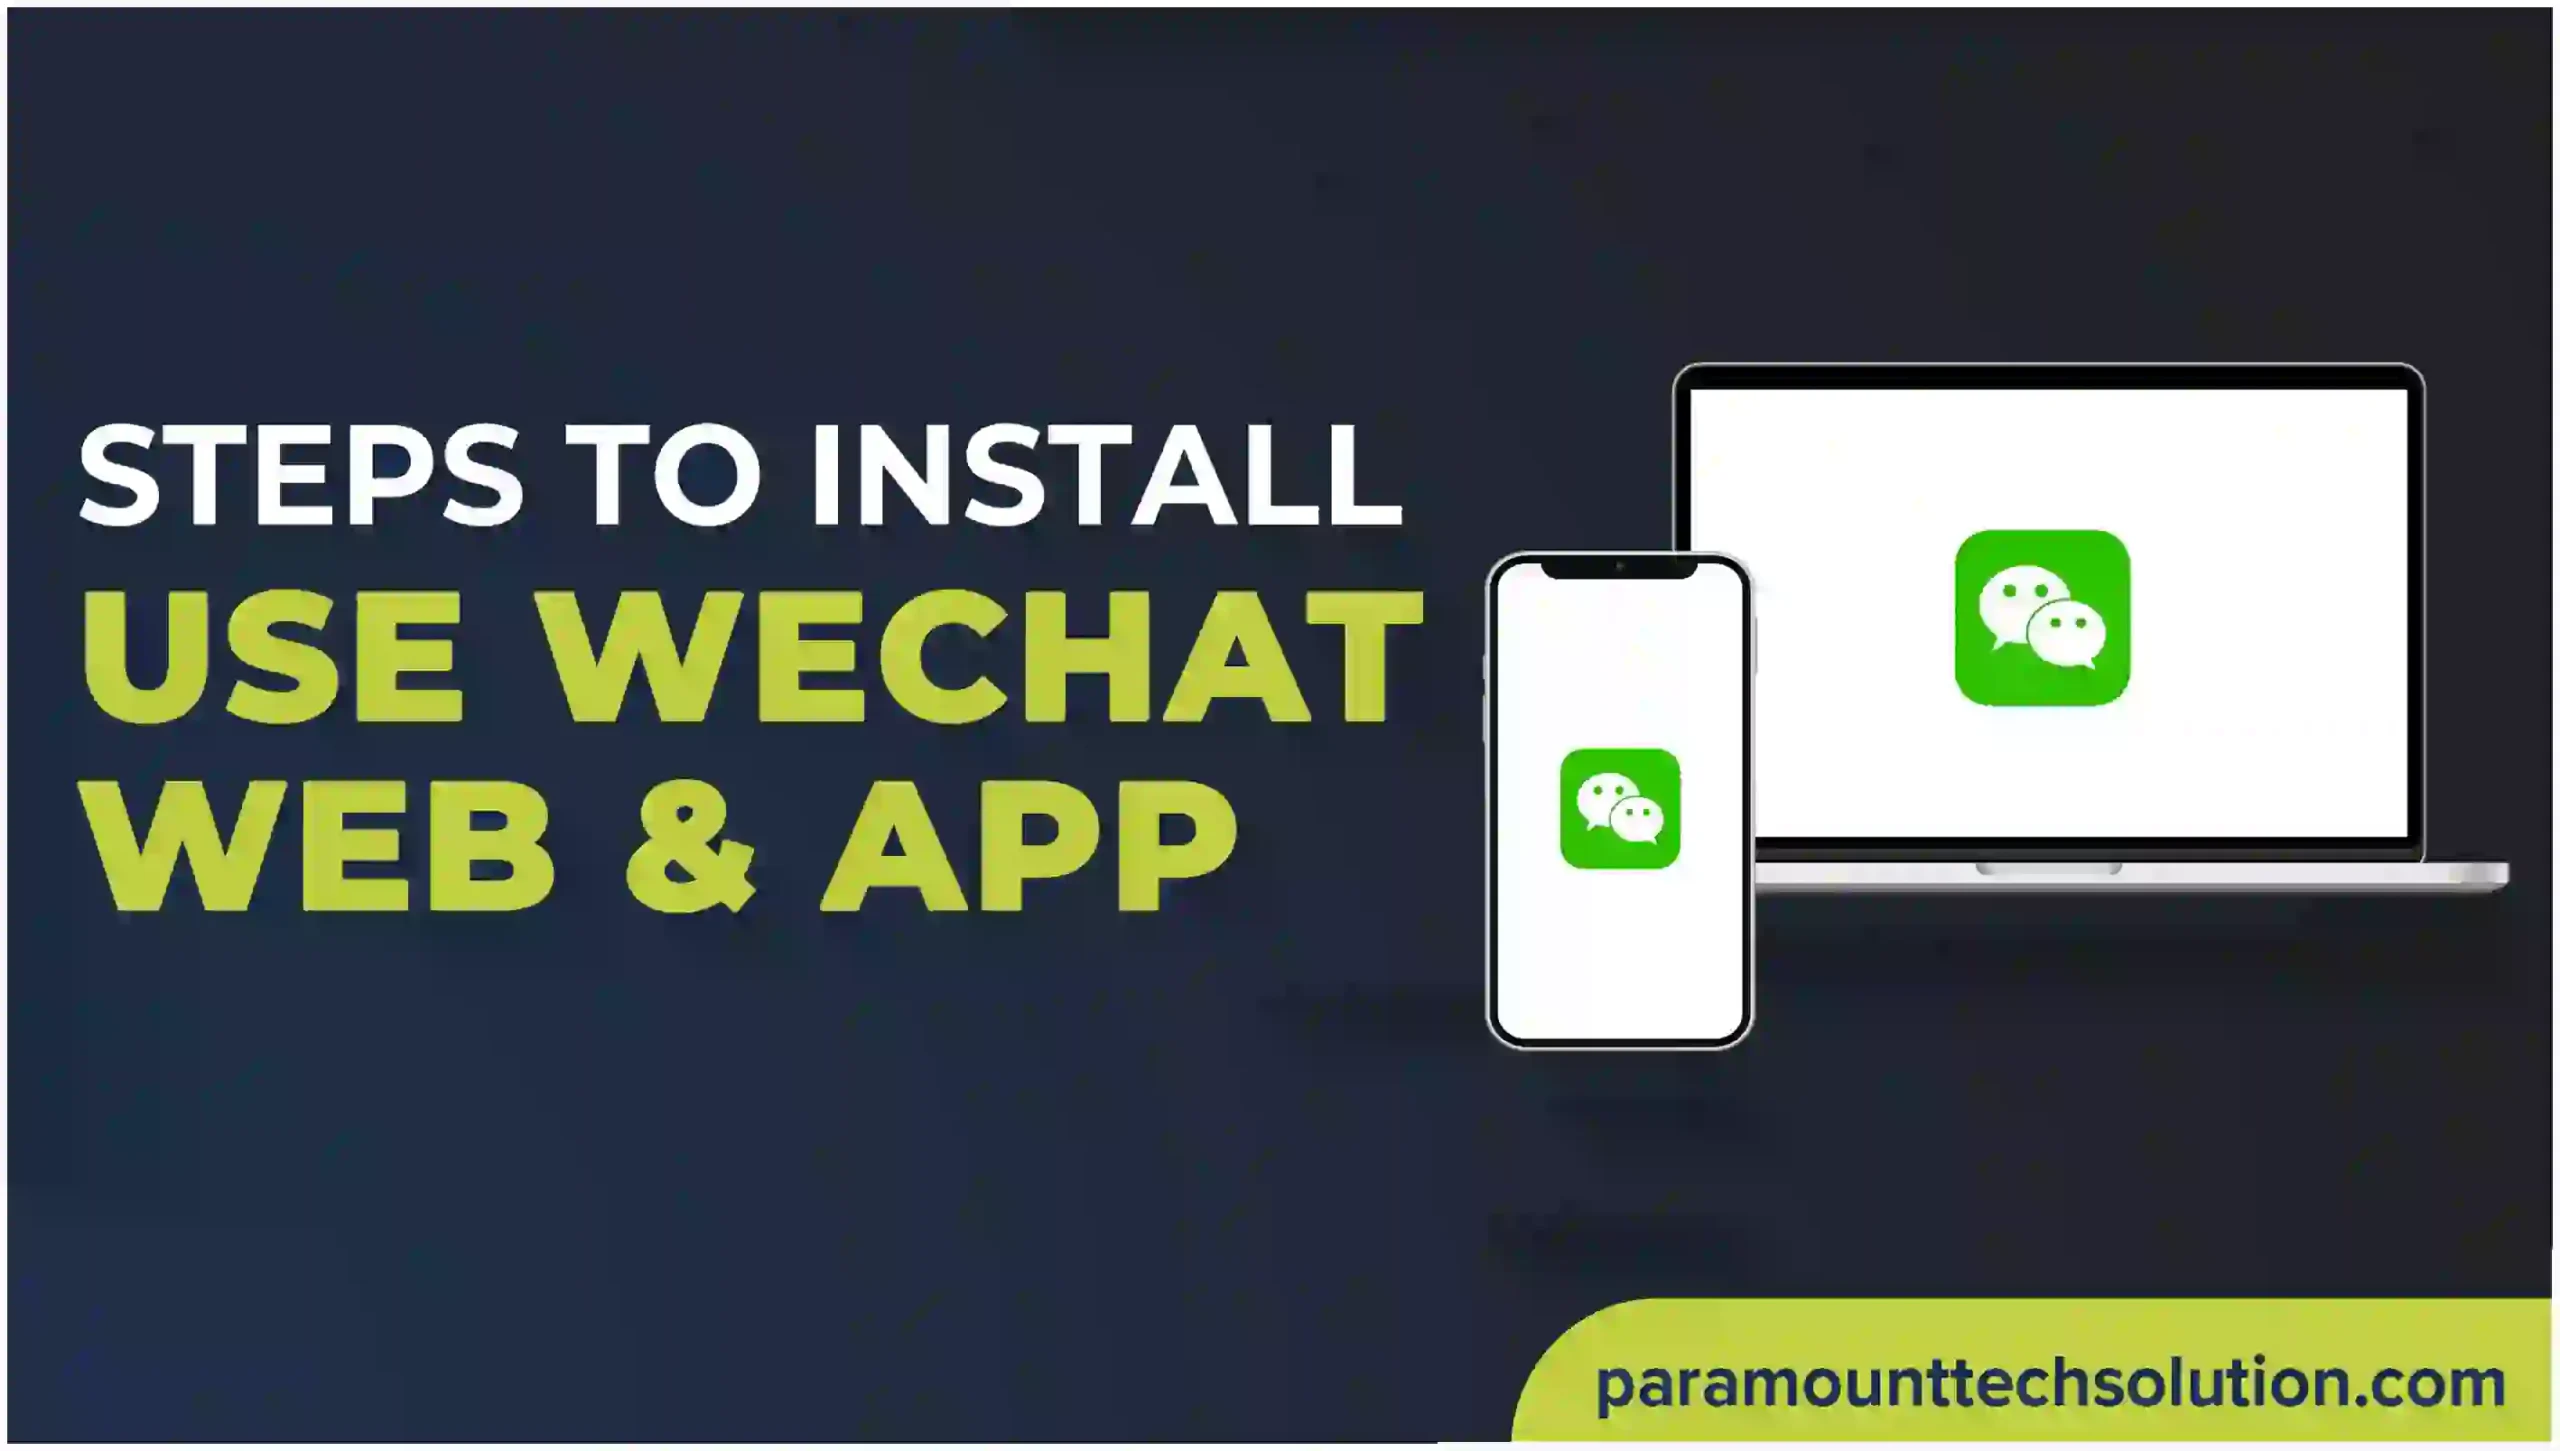 Steps to Install and Use WeChat Web & App including use of Key features of WeChat app